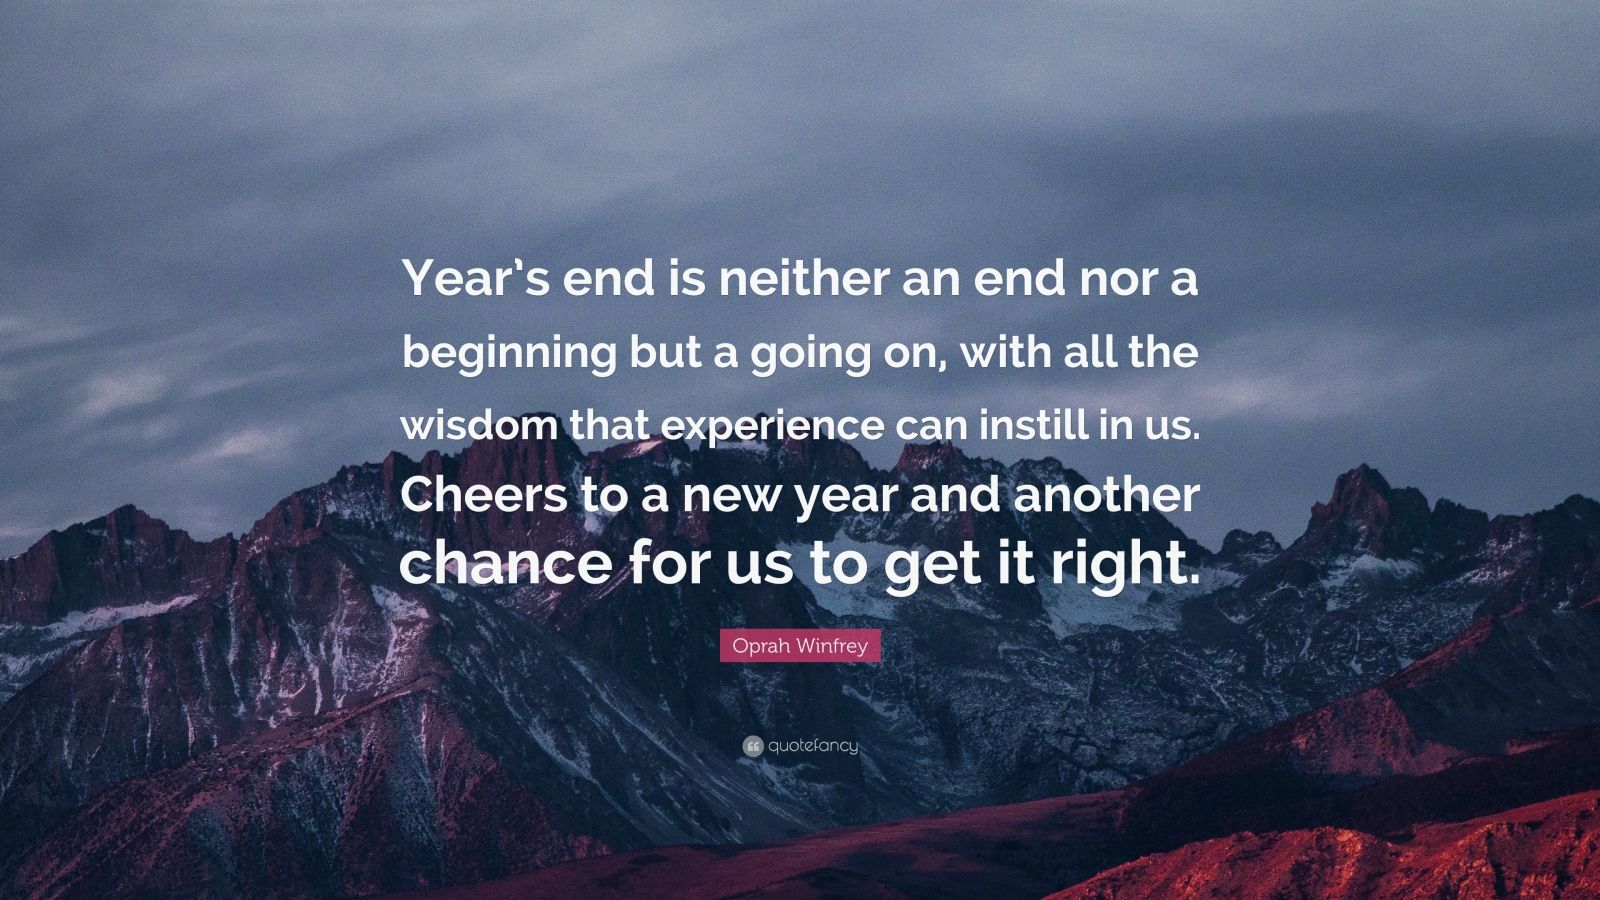 Oprah Winfrey Quote: “Year’s end is neither an end nor a beginning but